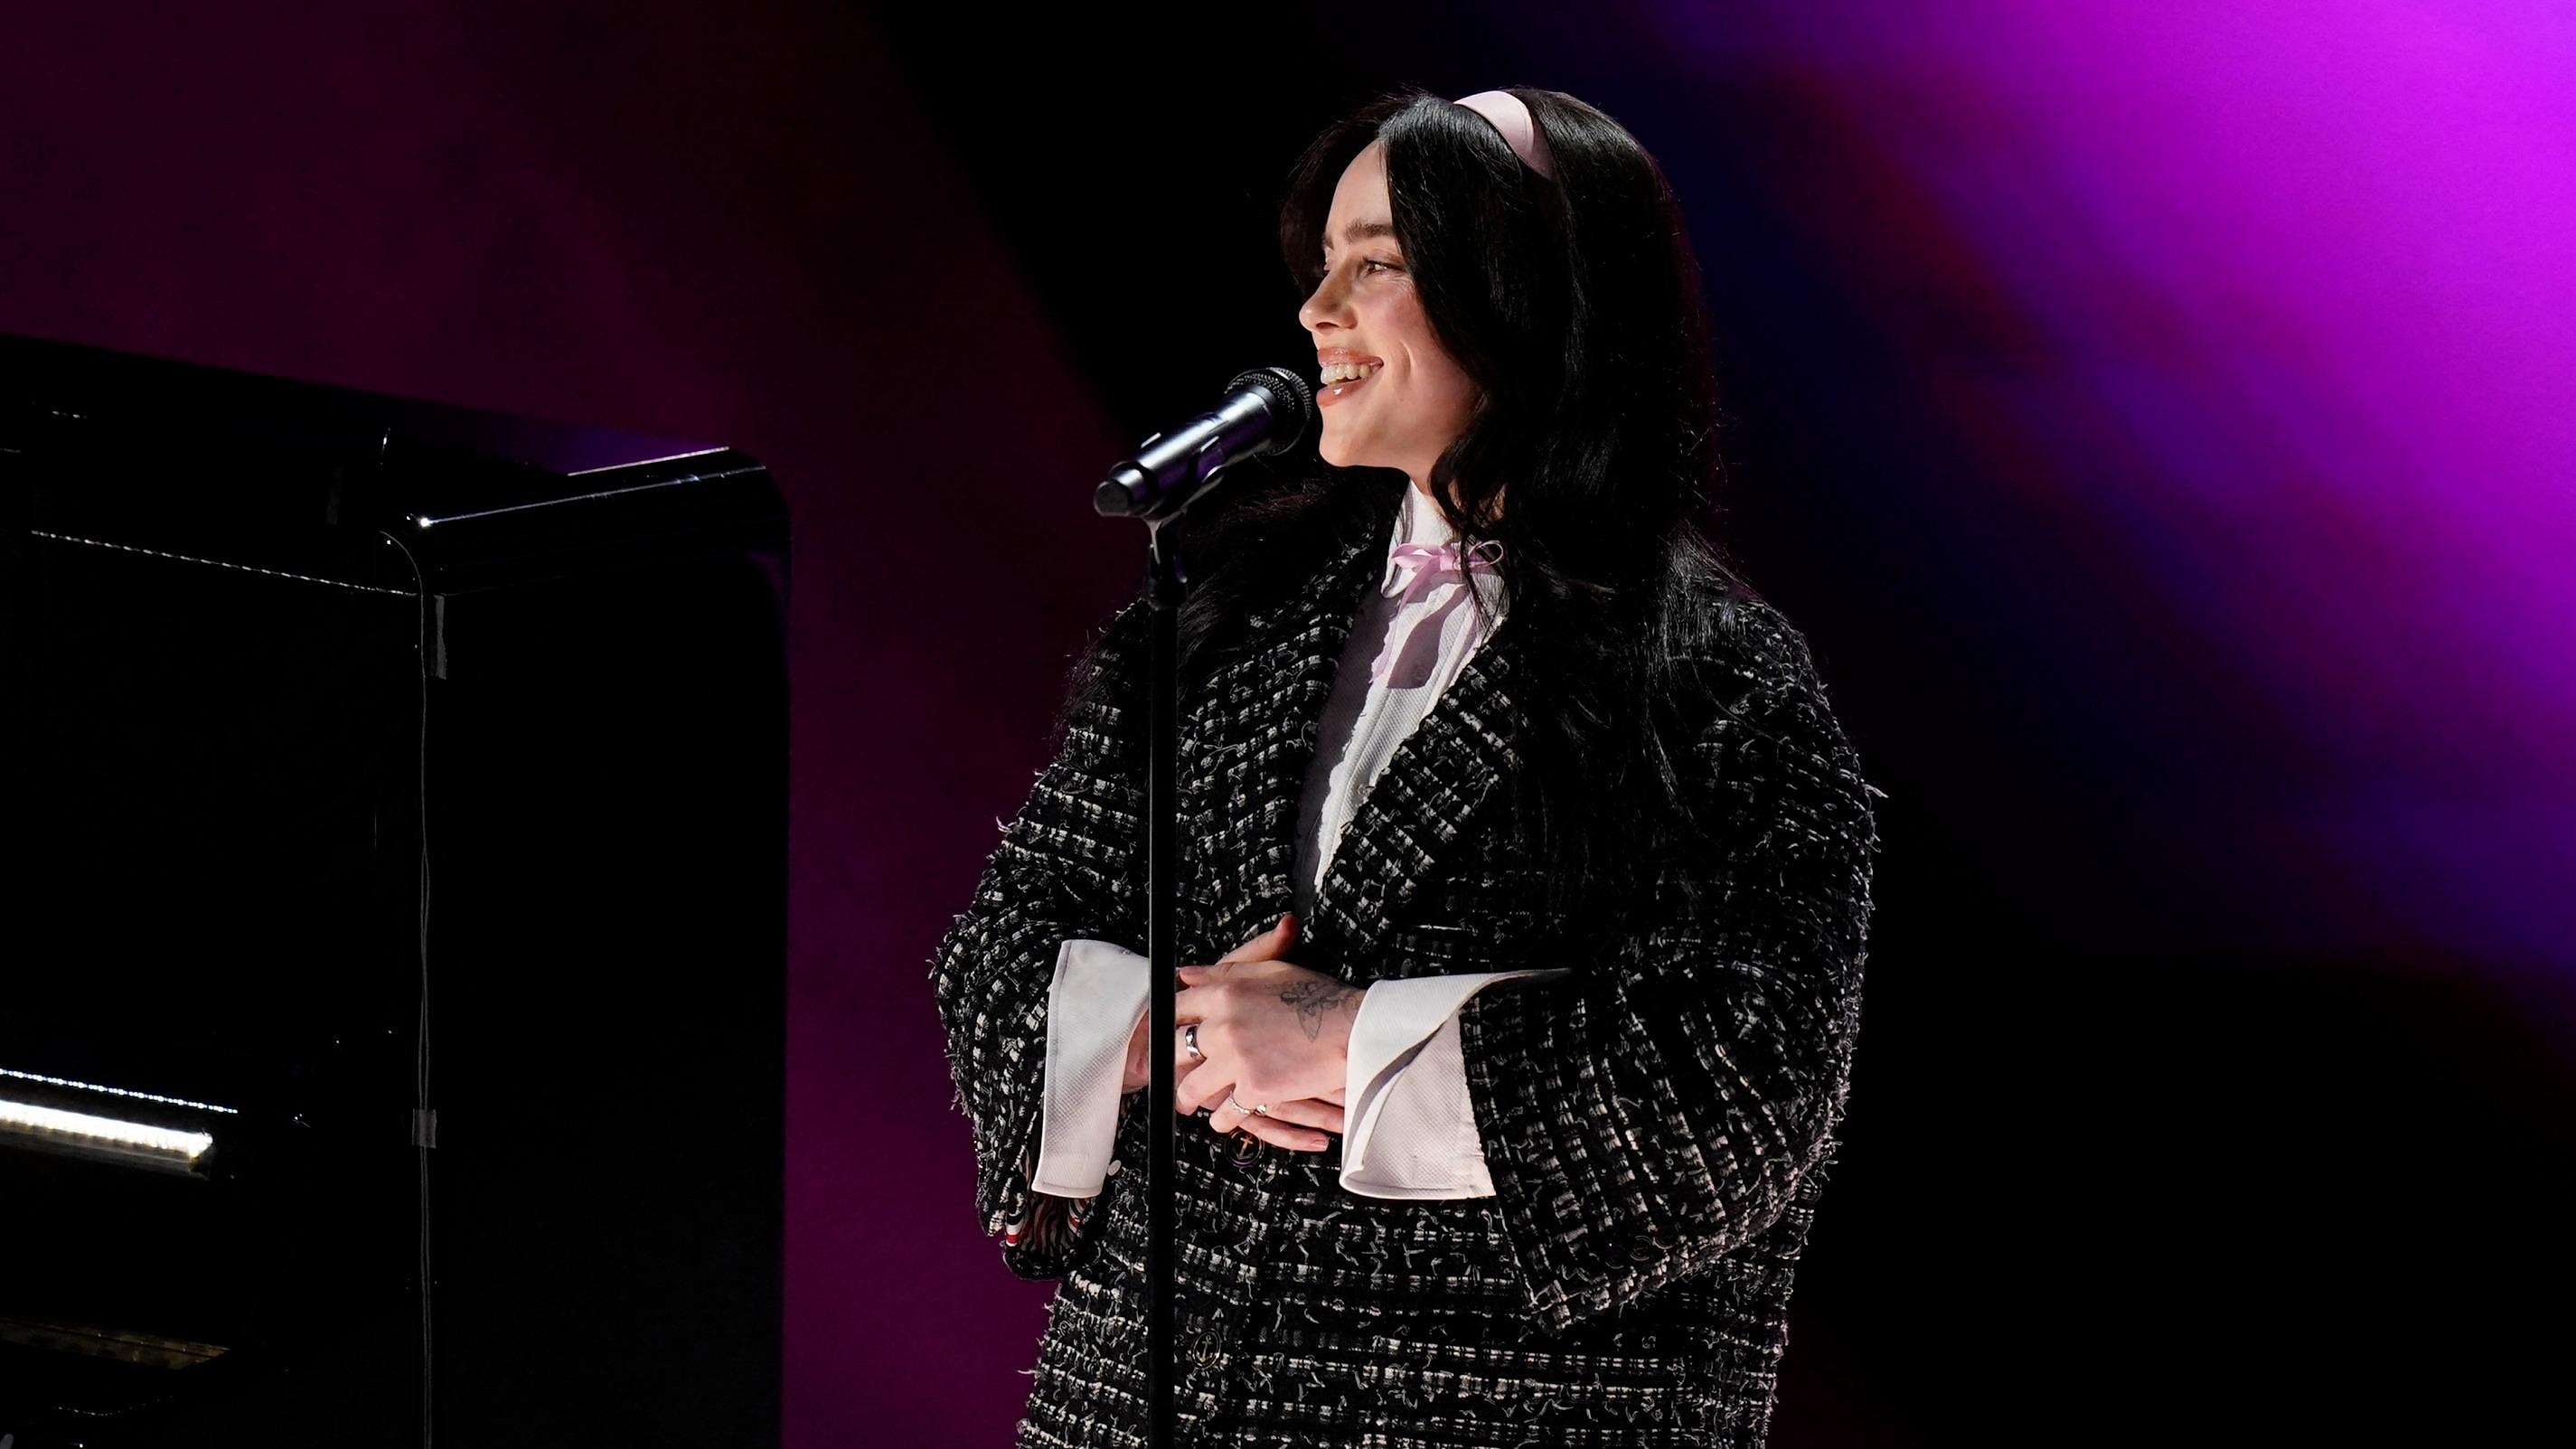 “I’m nervous and excited”: Billie Eilish’s new album in stores on May 17